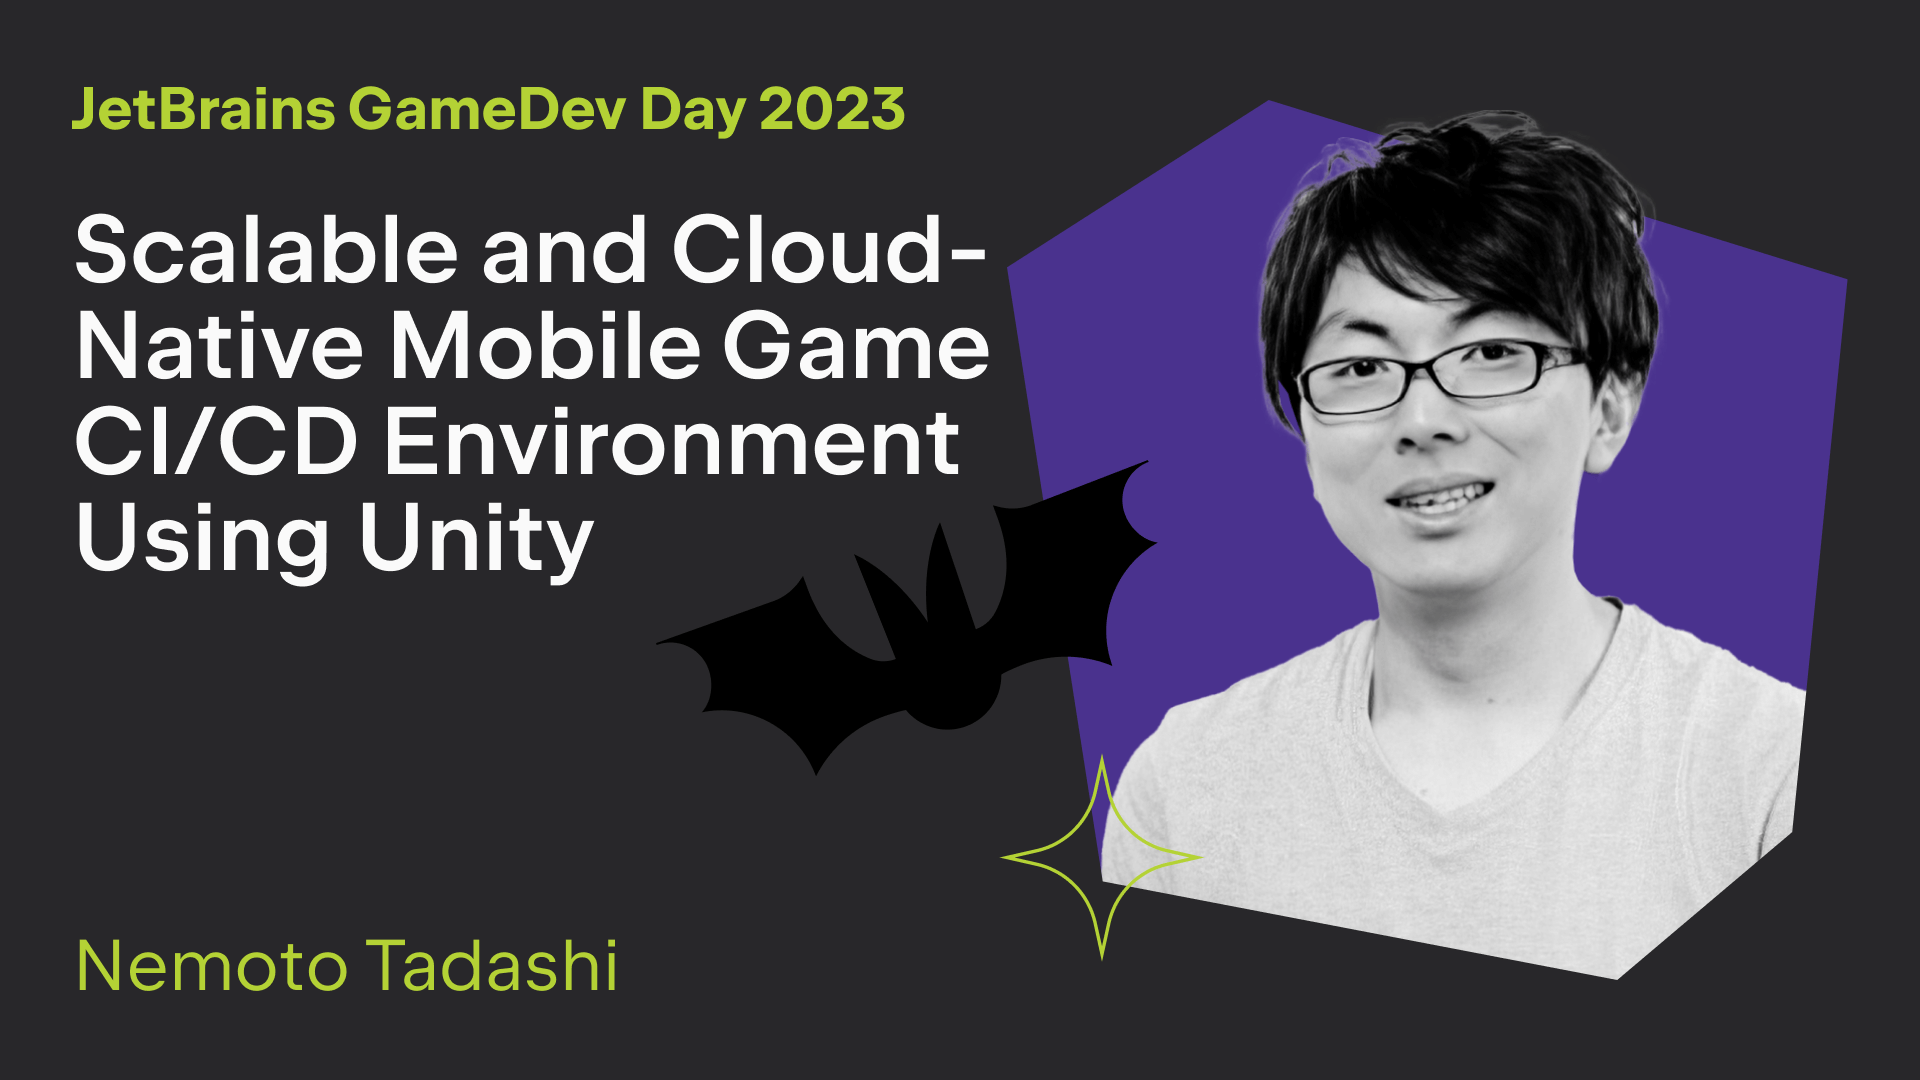 Scalable and Cloud-Native Mobile Game CI/CD Environment Using Unity